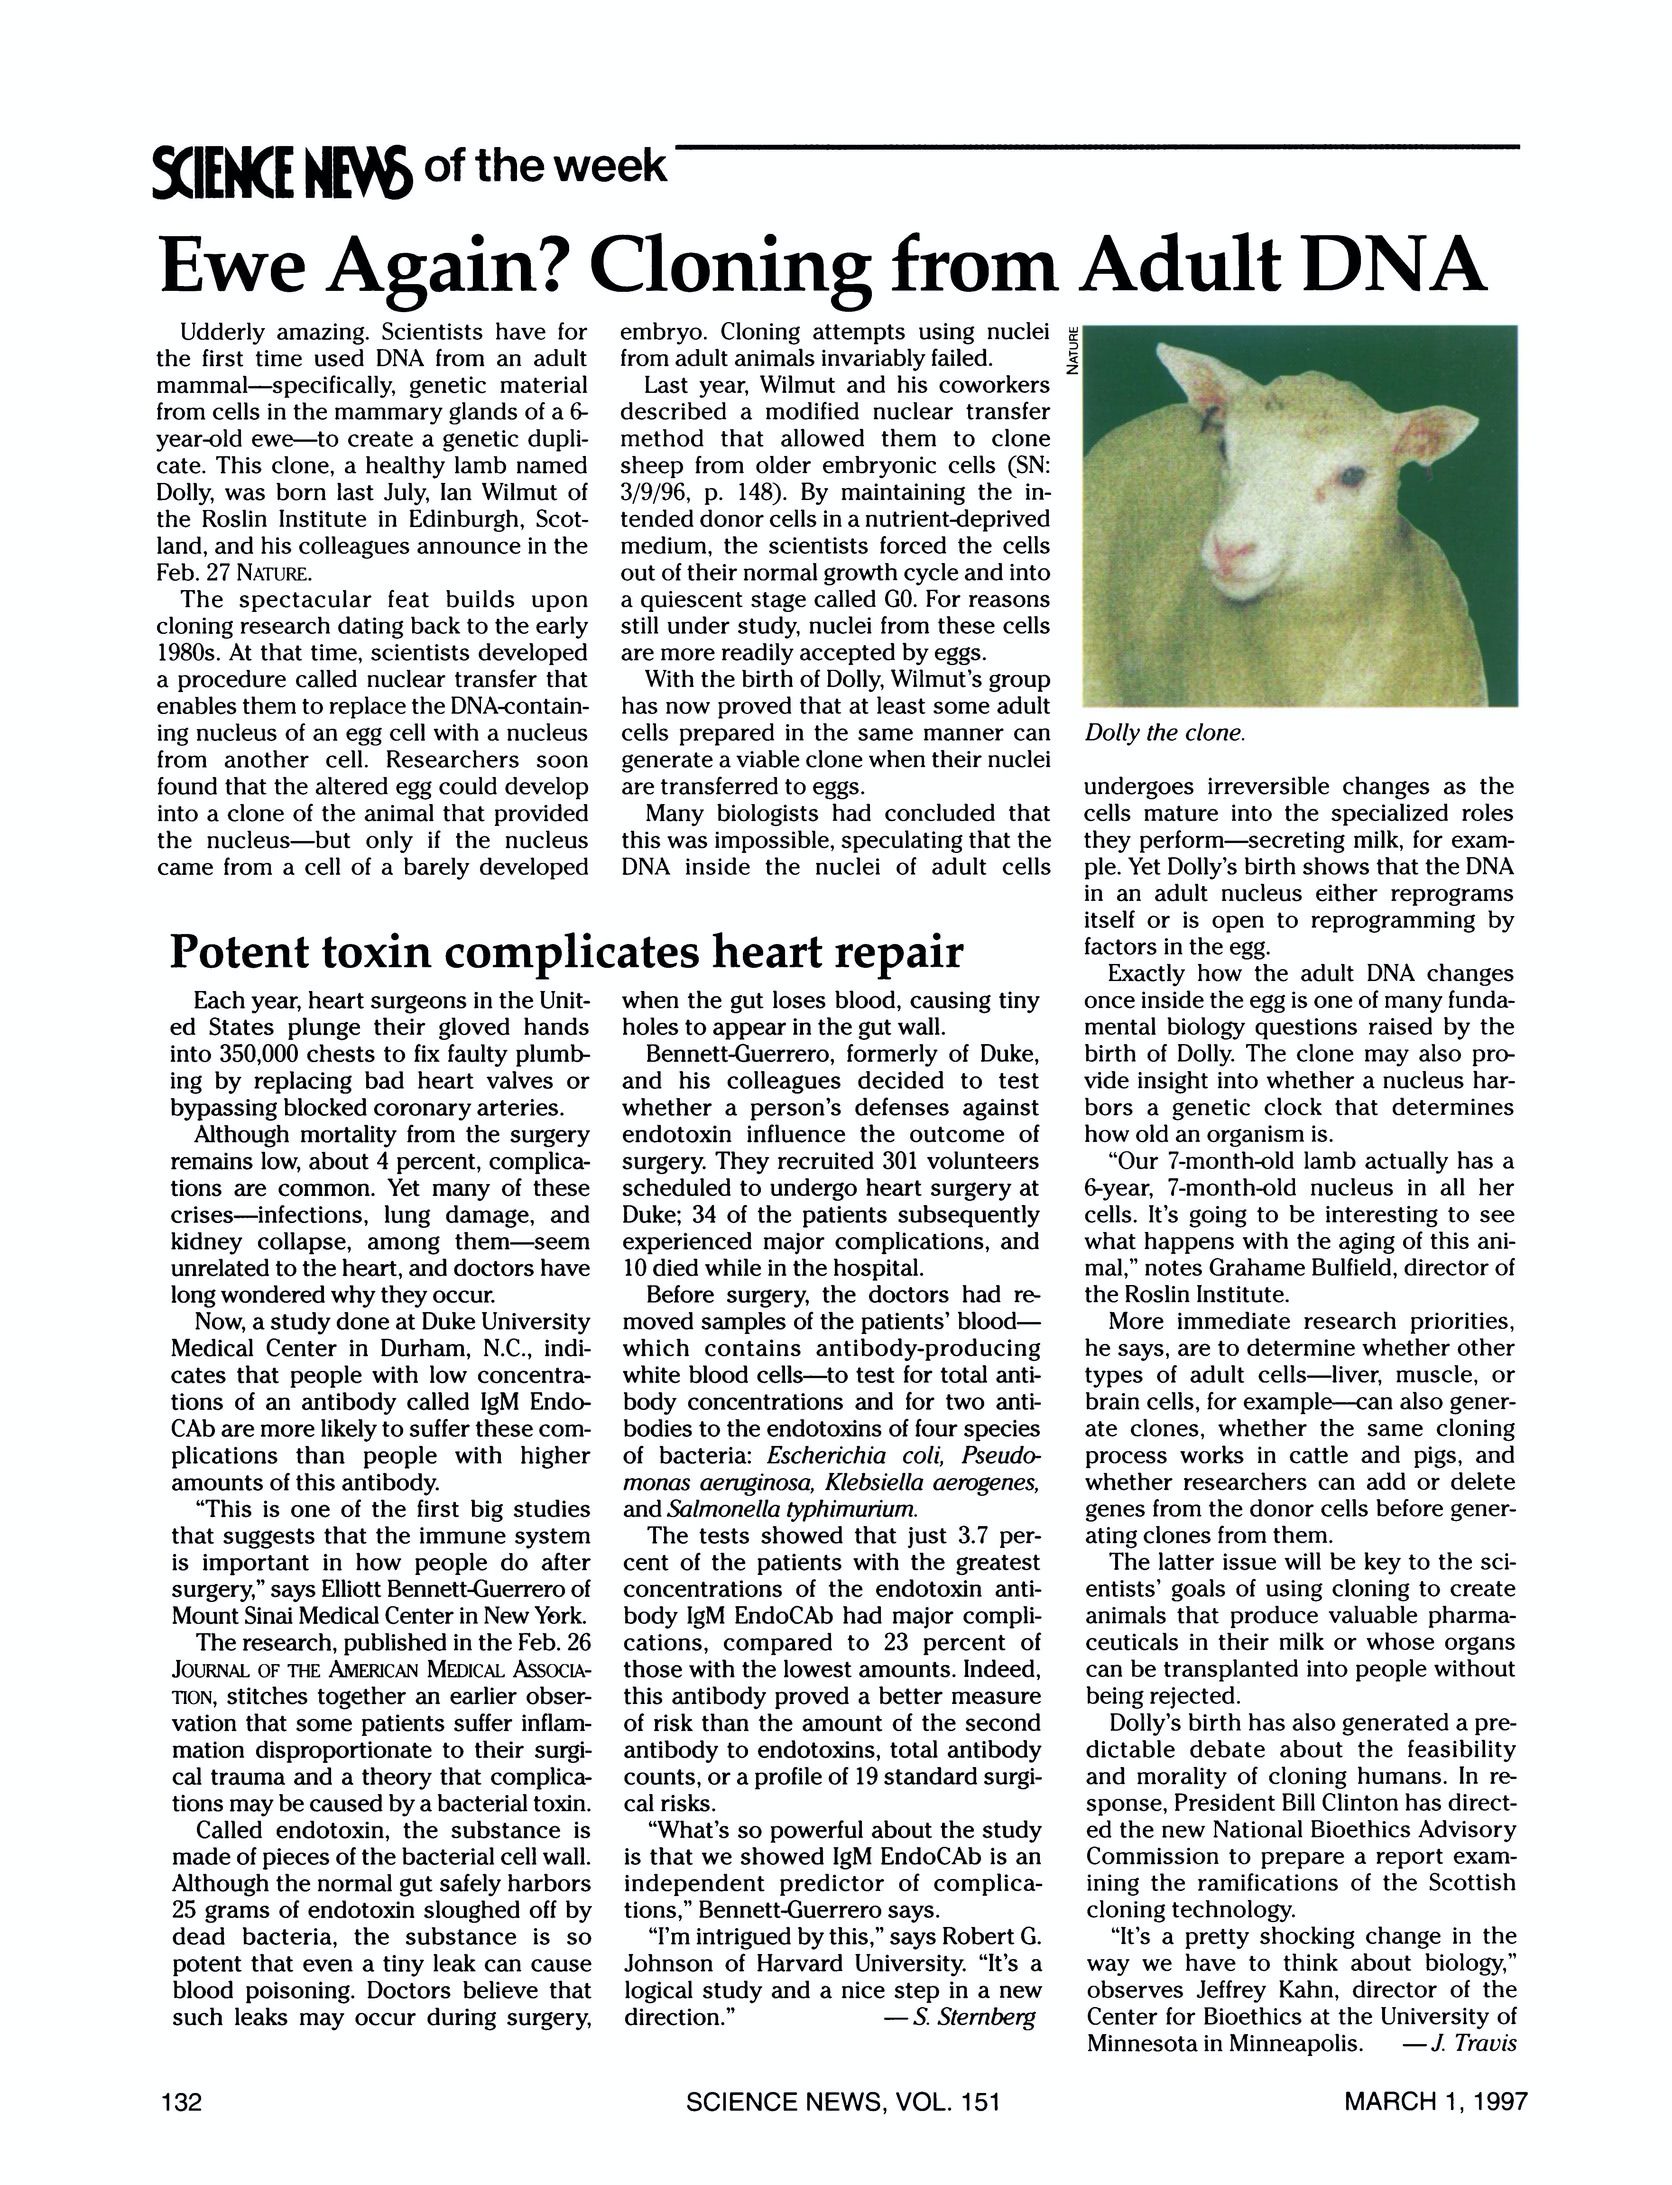 1997: Science News reports on Dolly the sheep - Society for Science  Centennial Project